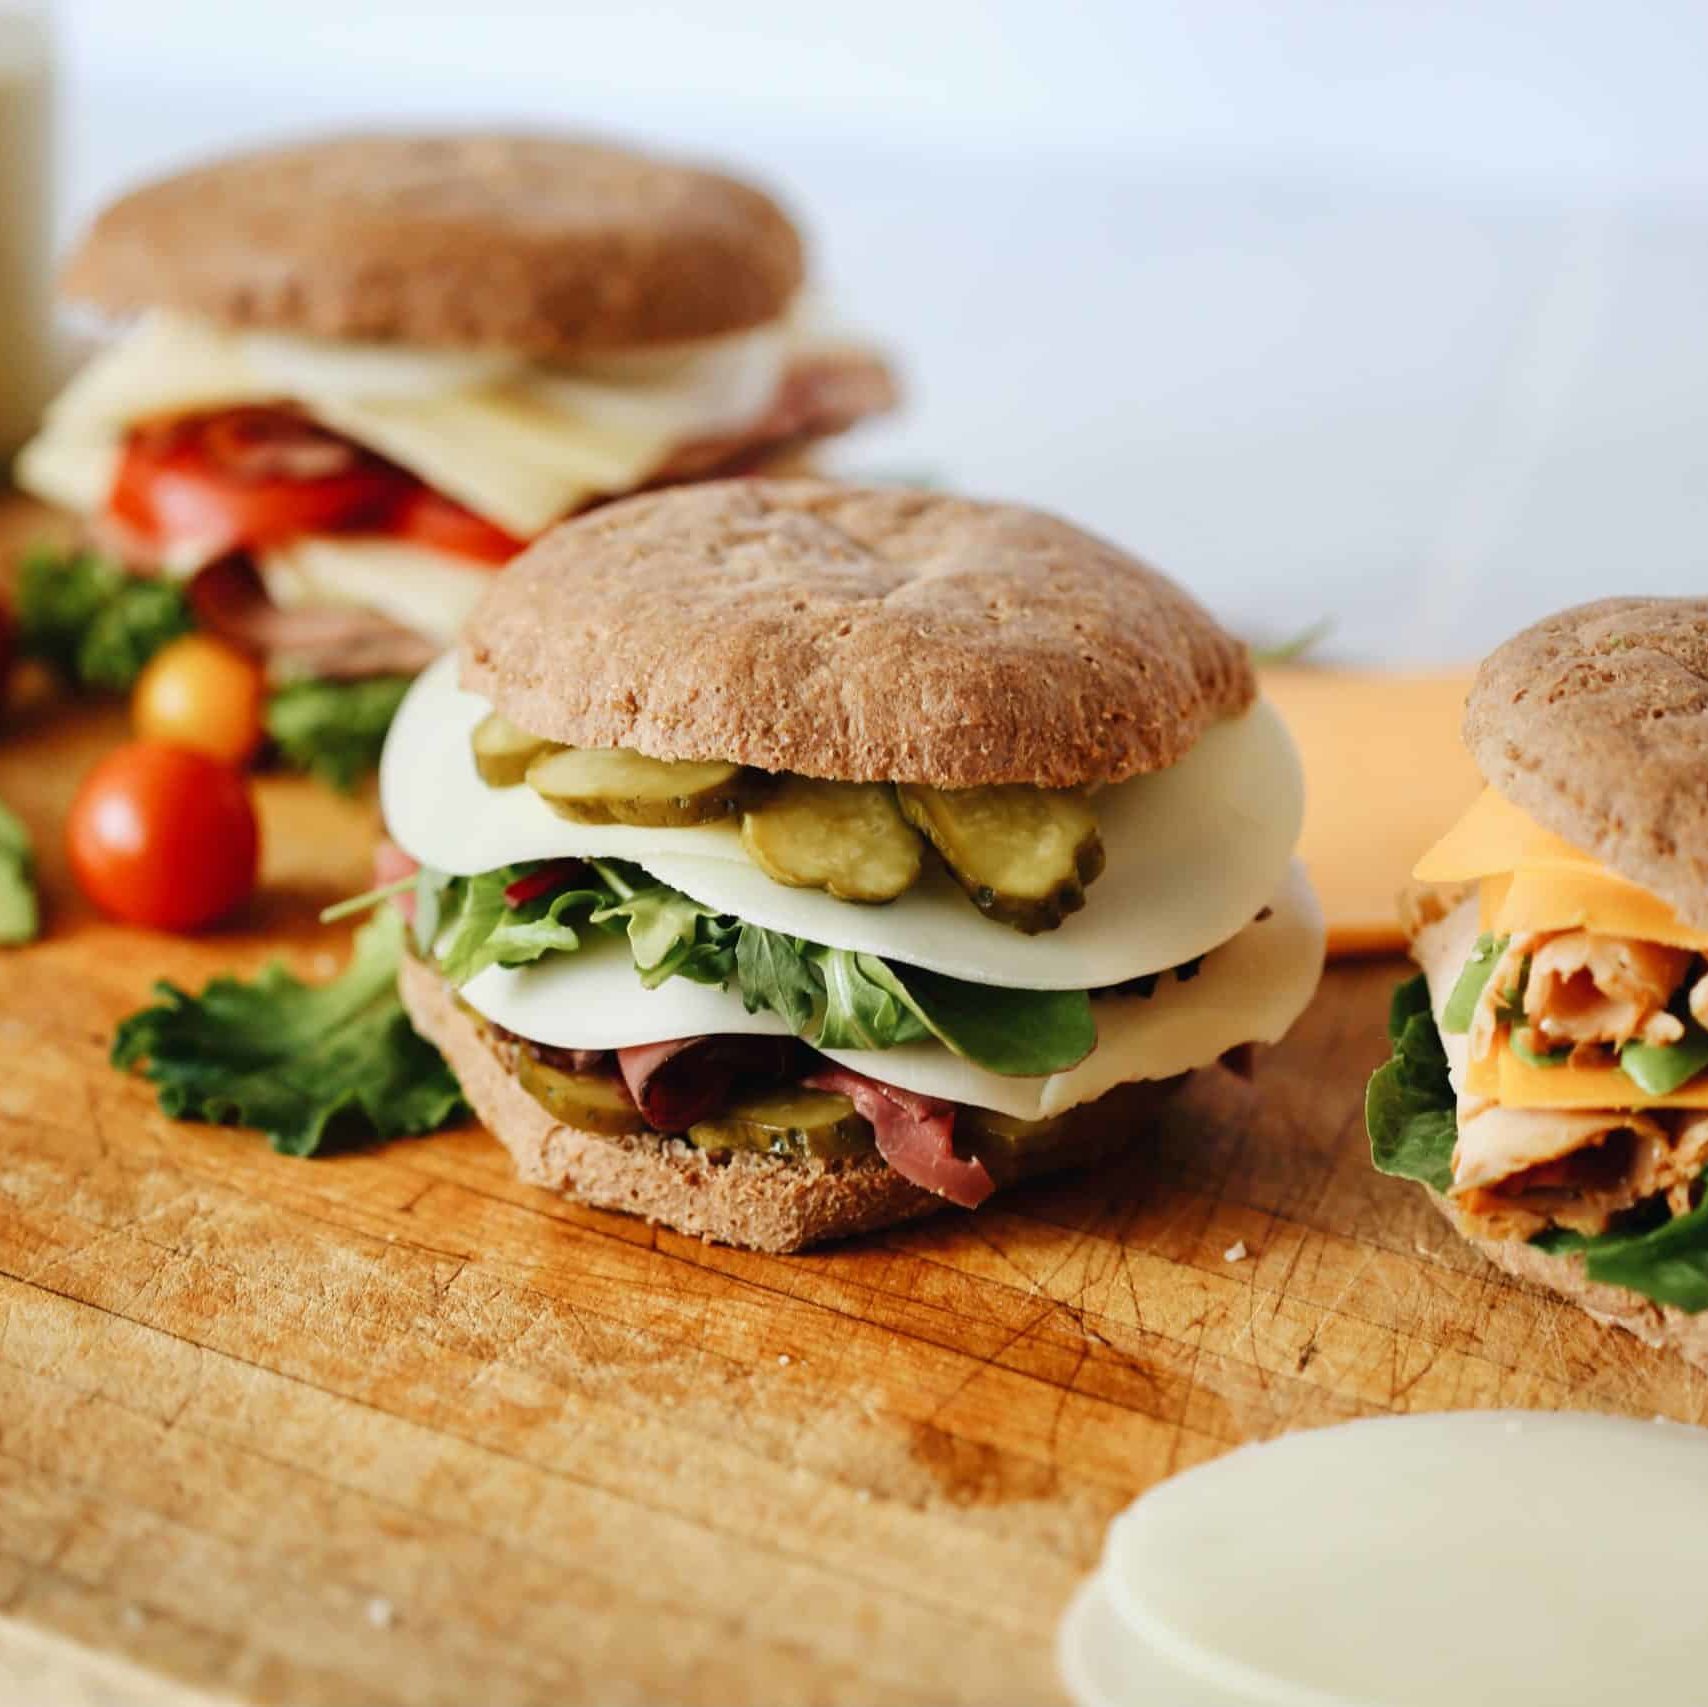 Sandwiches made from Gluten Free All Purpose Bread Mix